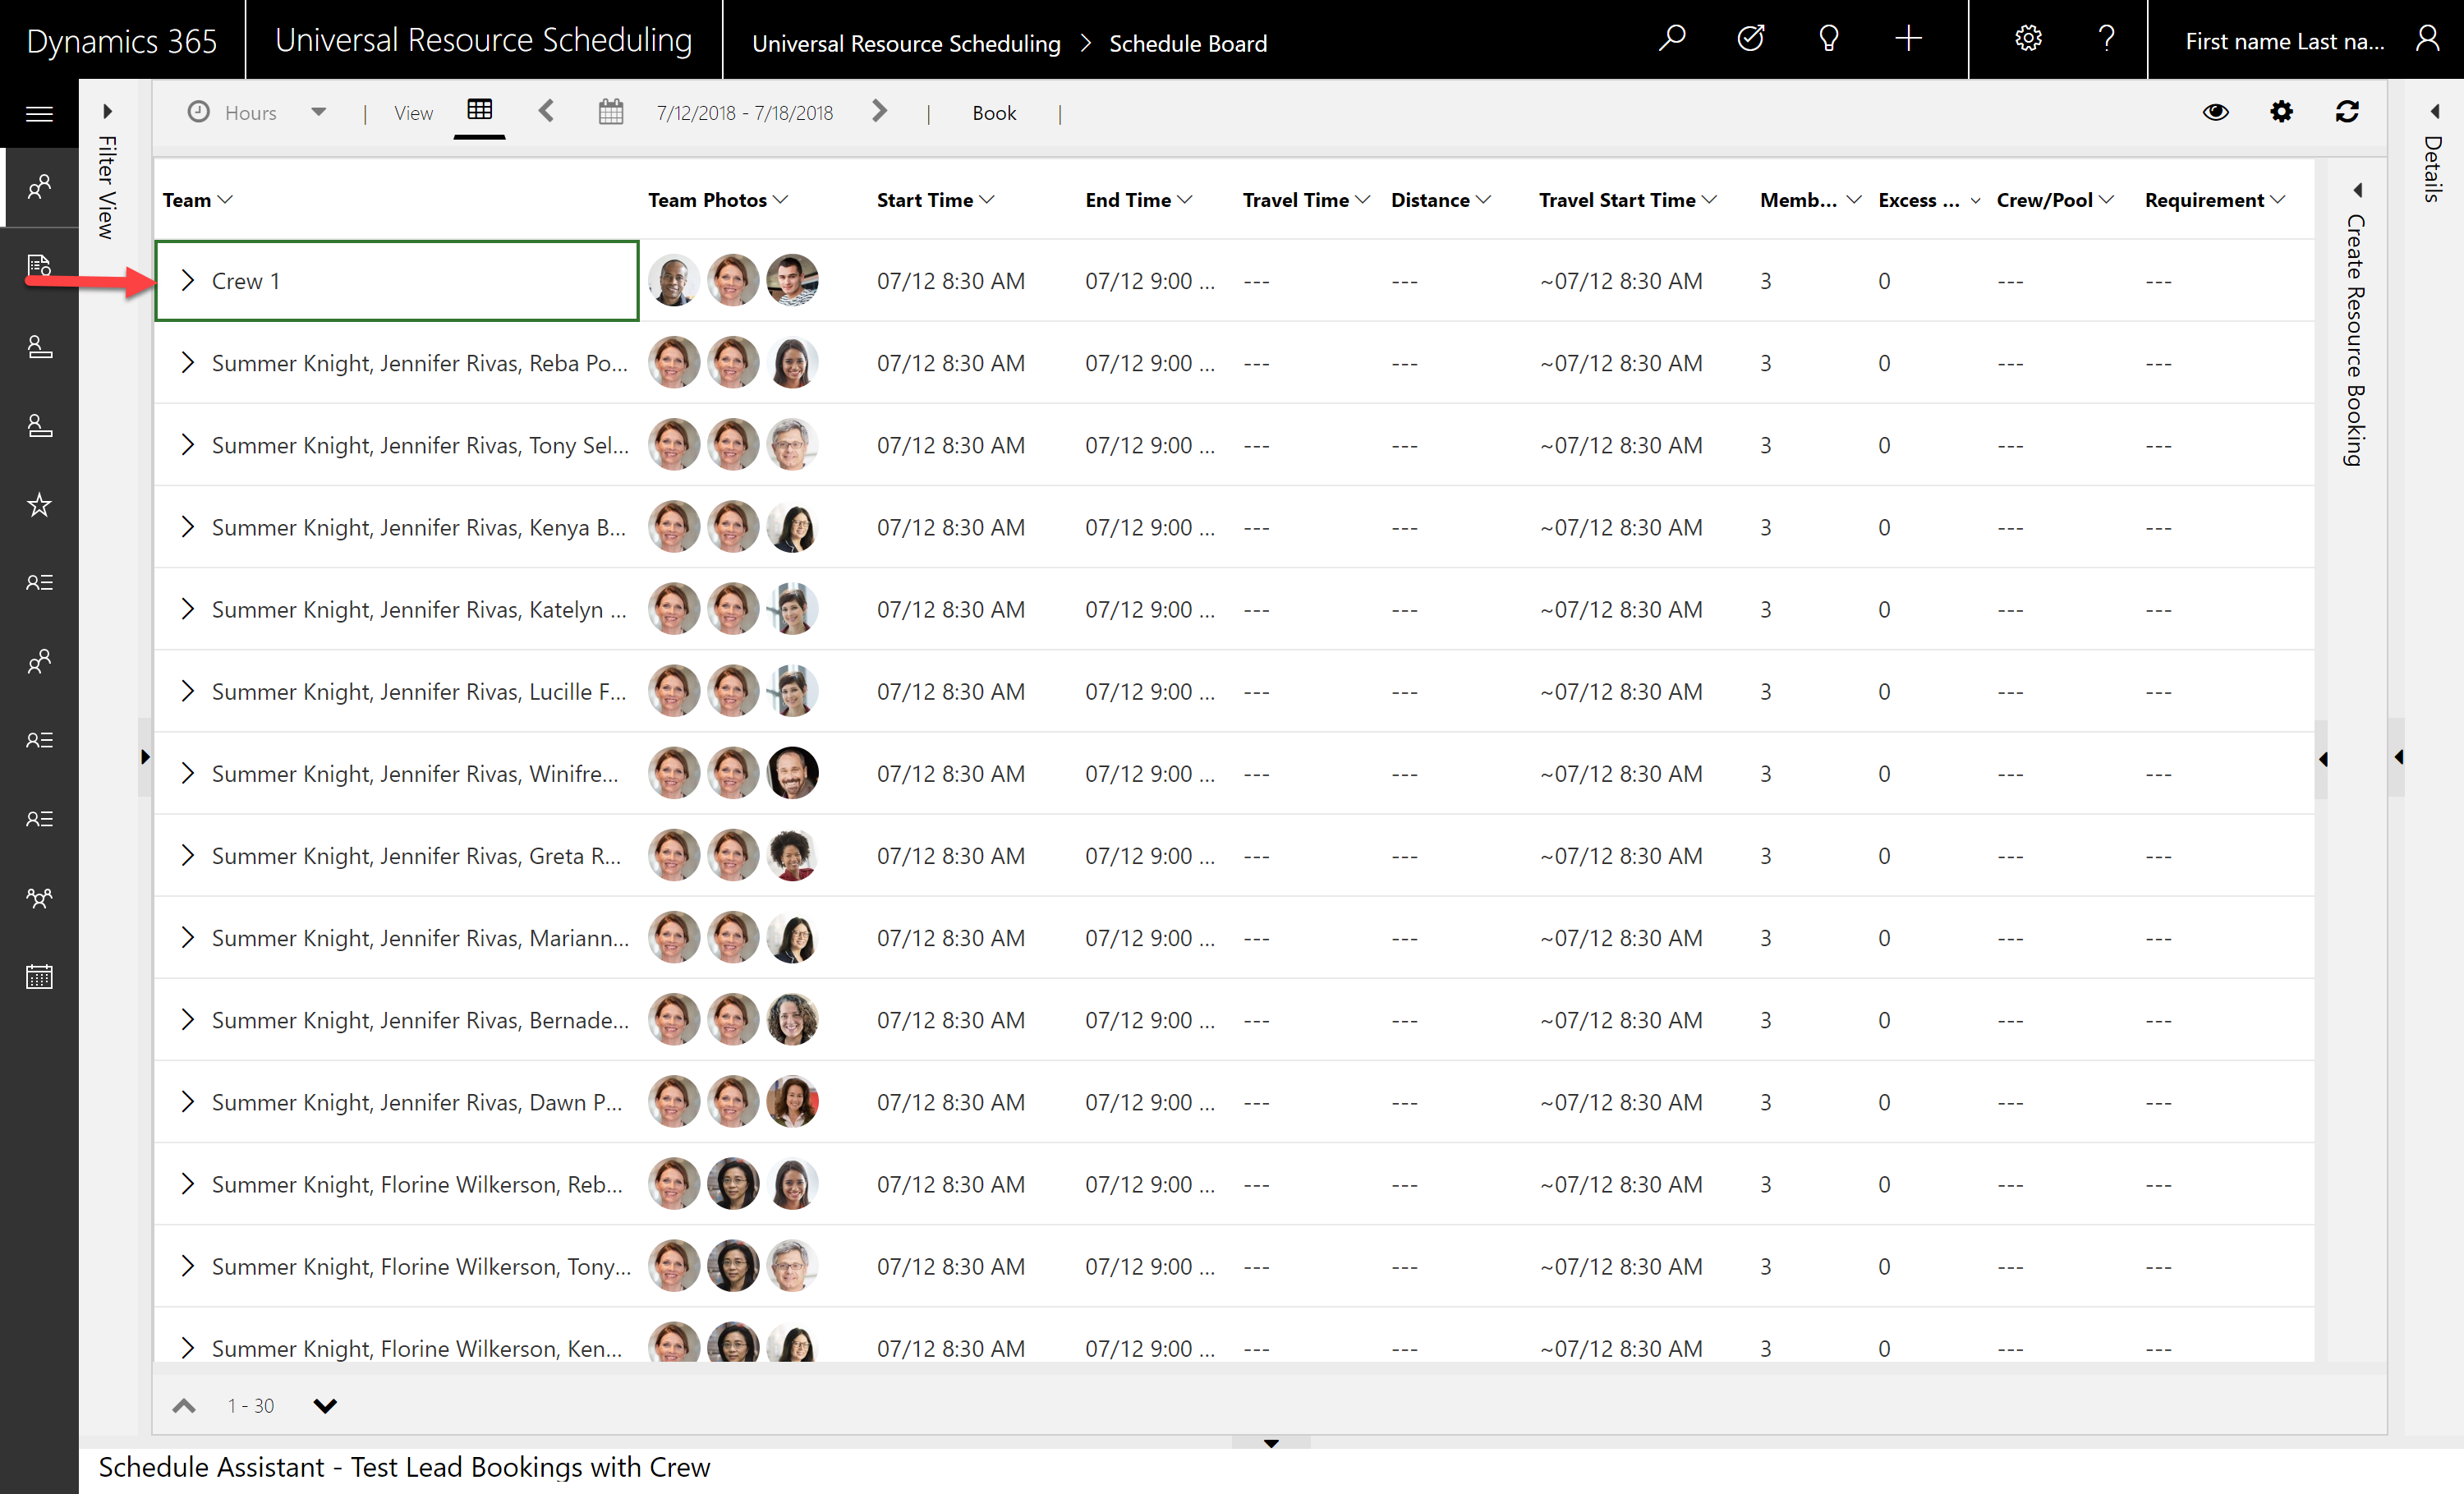 Screenshot showing Schedule Assistant results where the crew is an option as are other dynamically assembled teams.